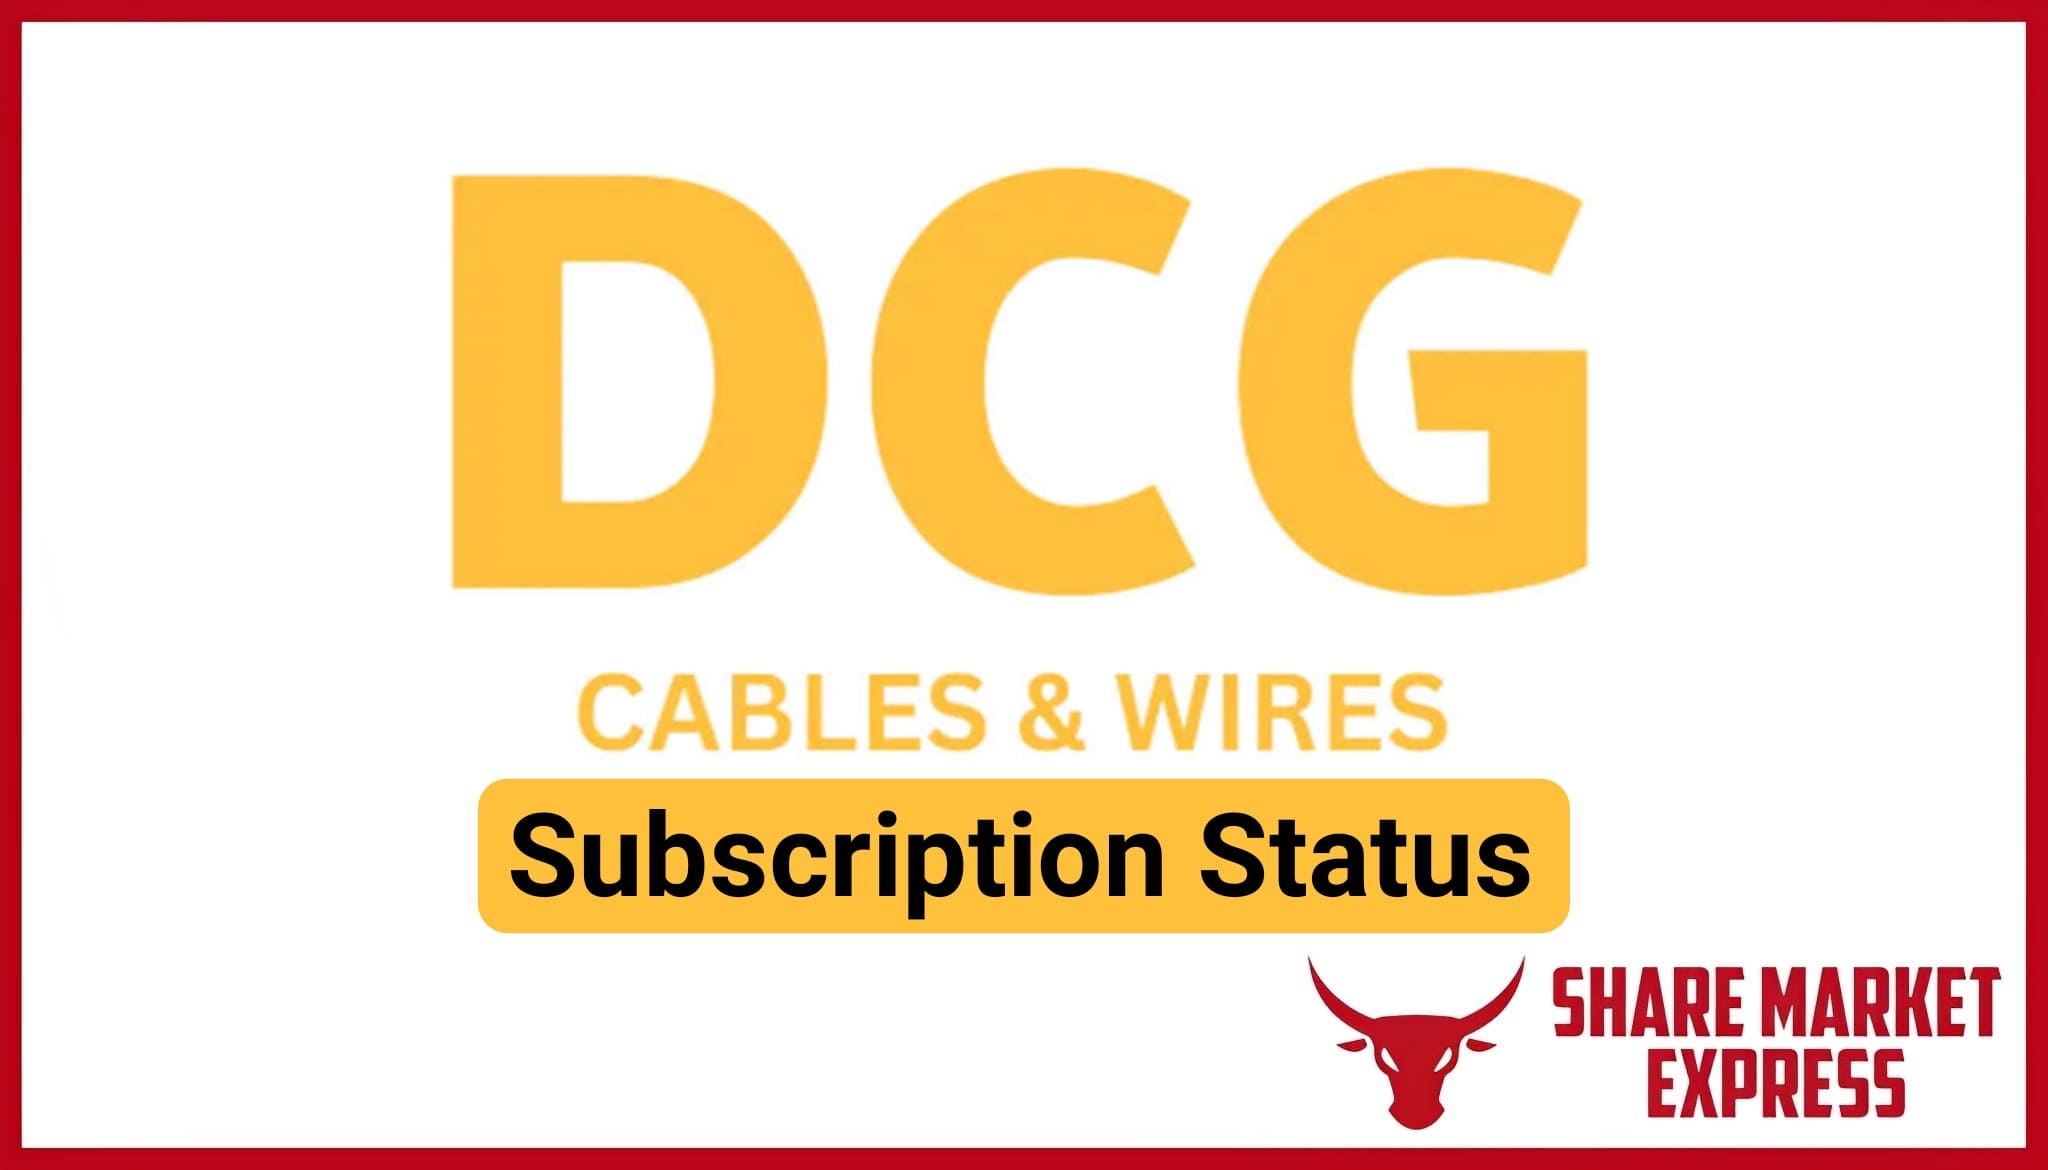 DCG Cables IPO Subscription Status